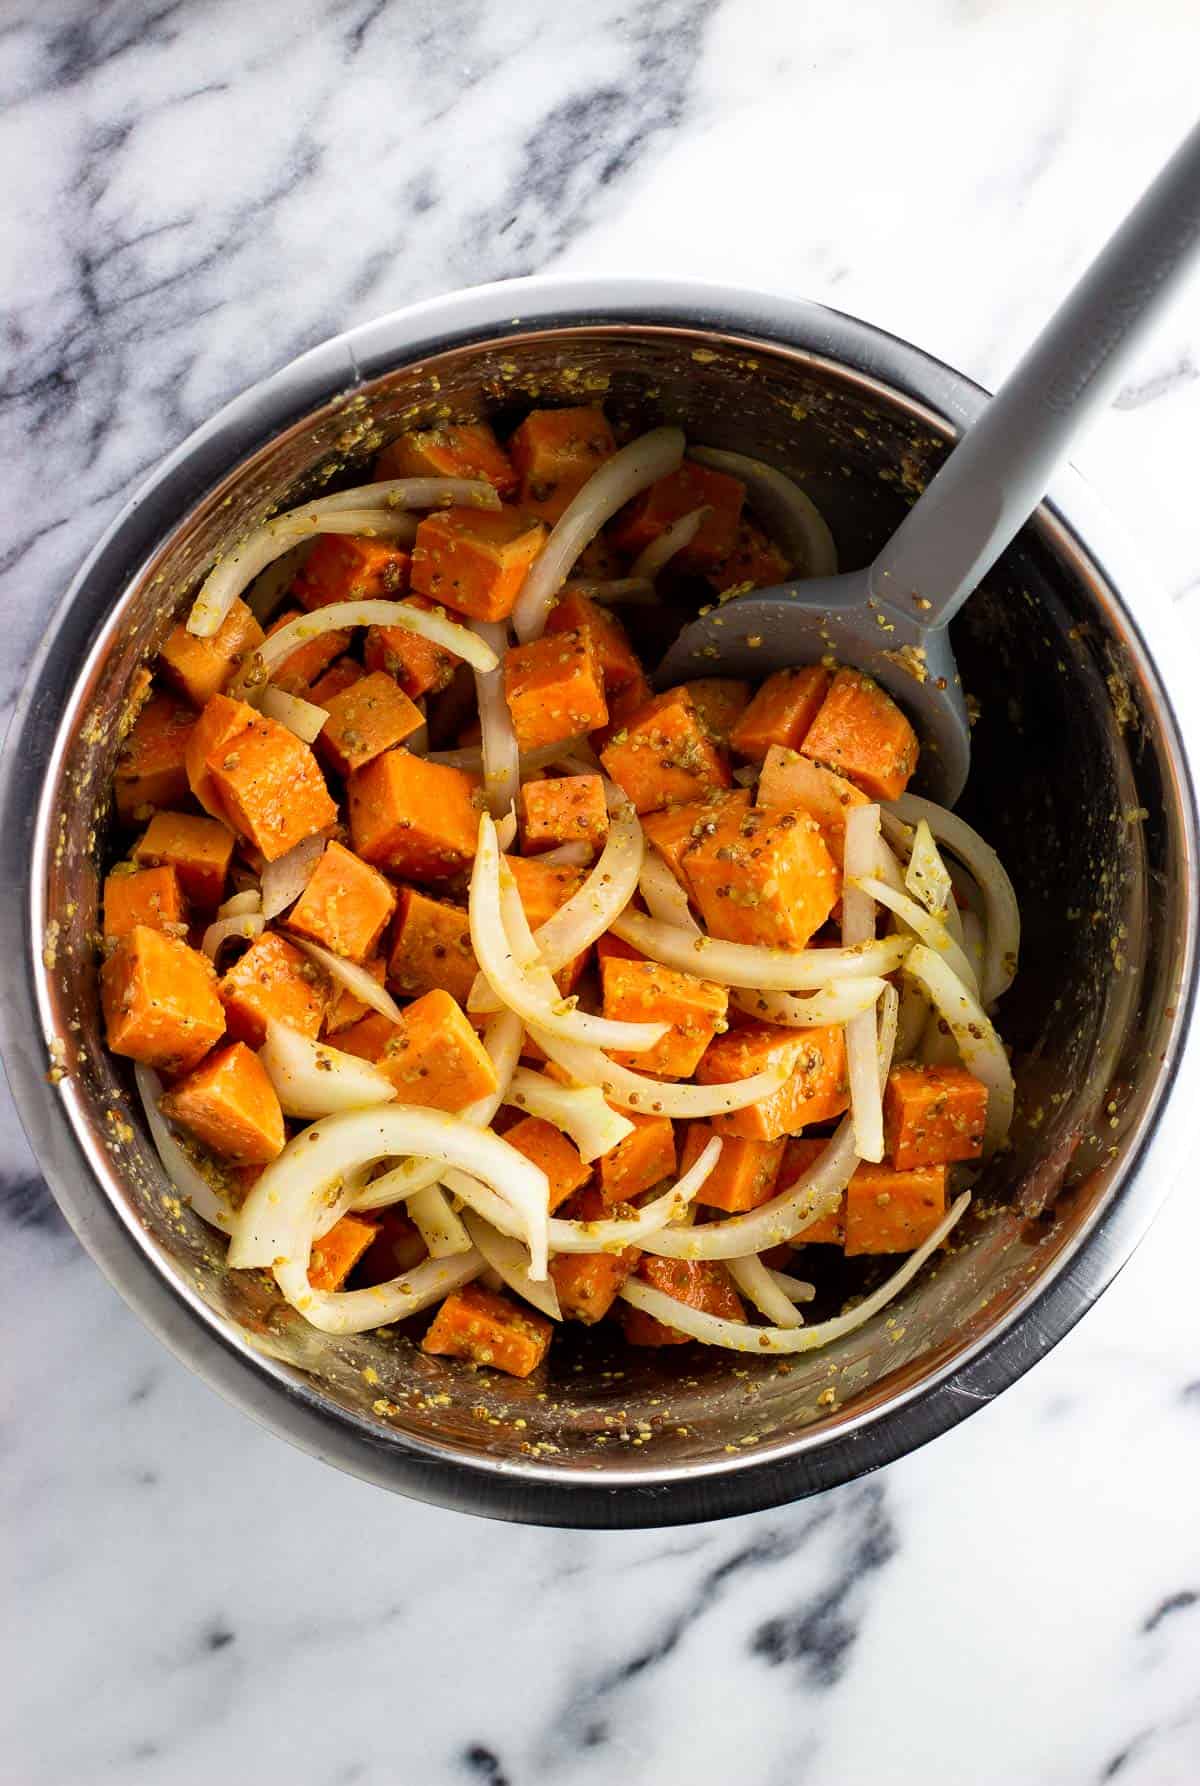 The sweet potatoes and onions mixed together in a bowl.